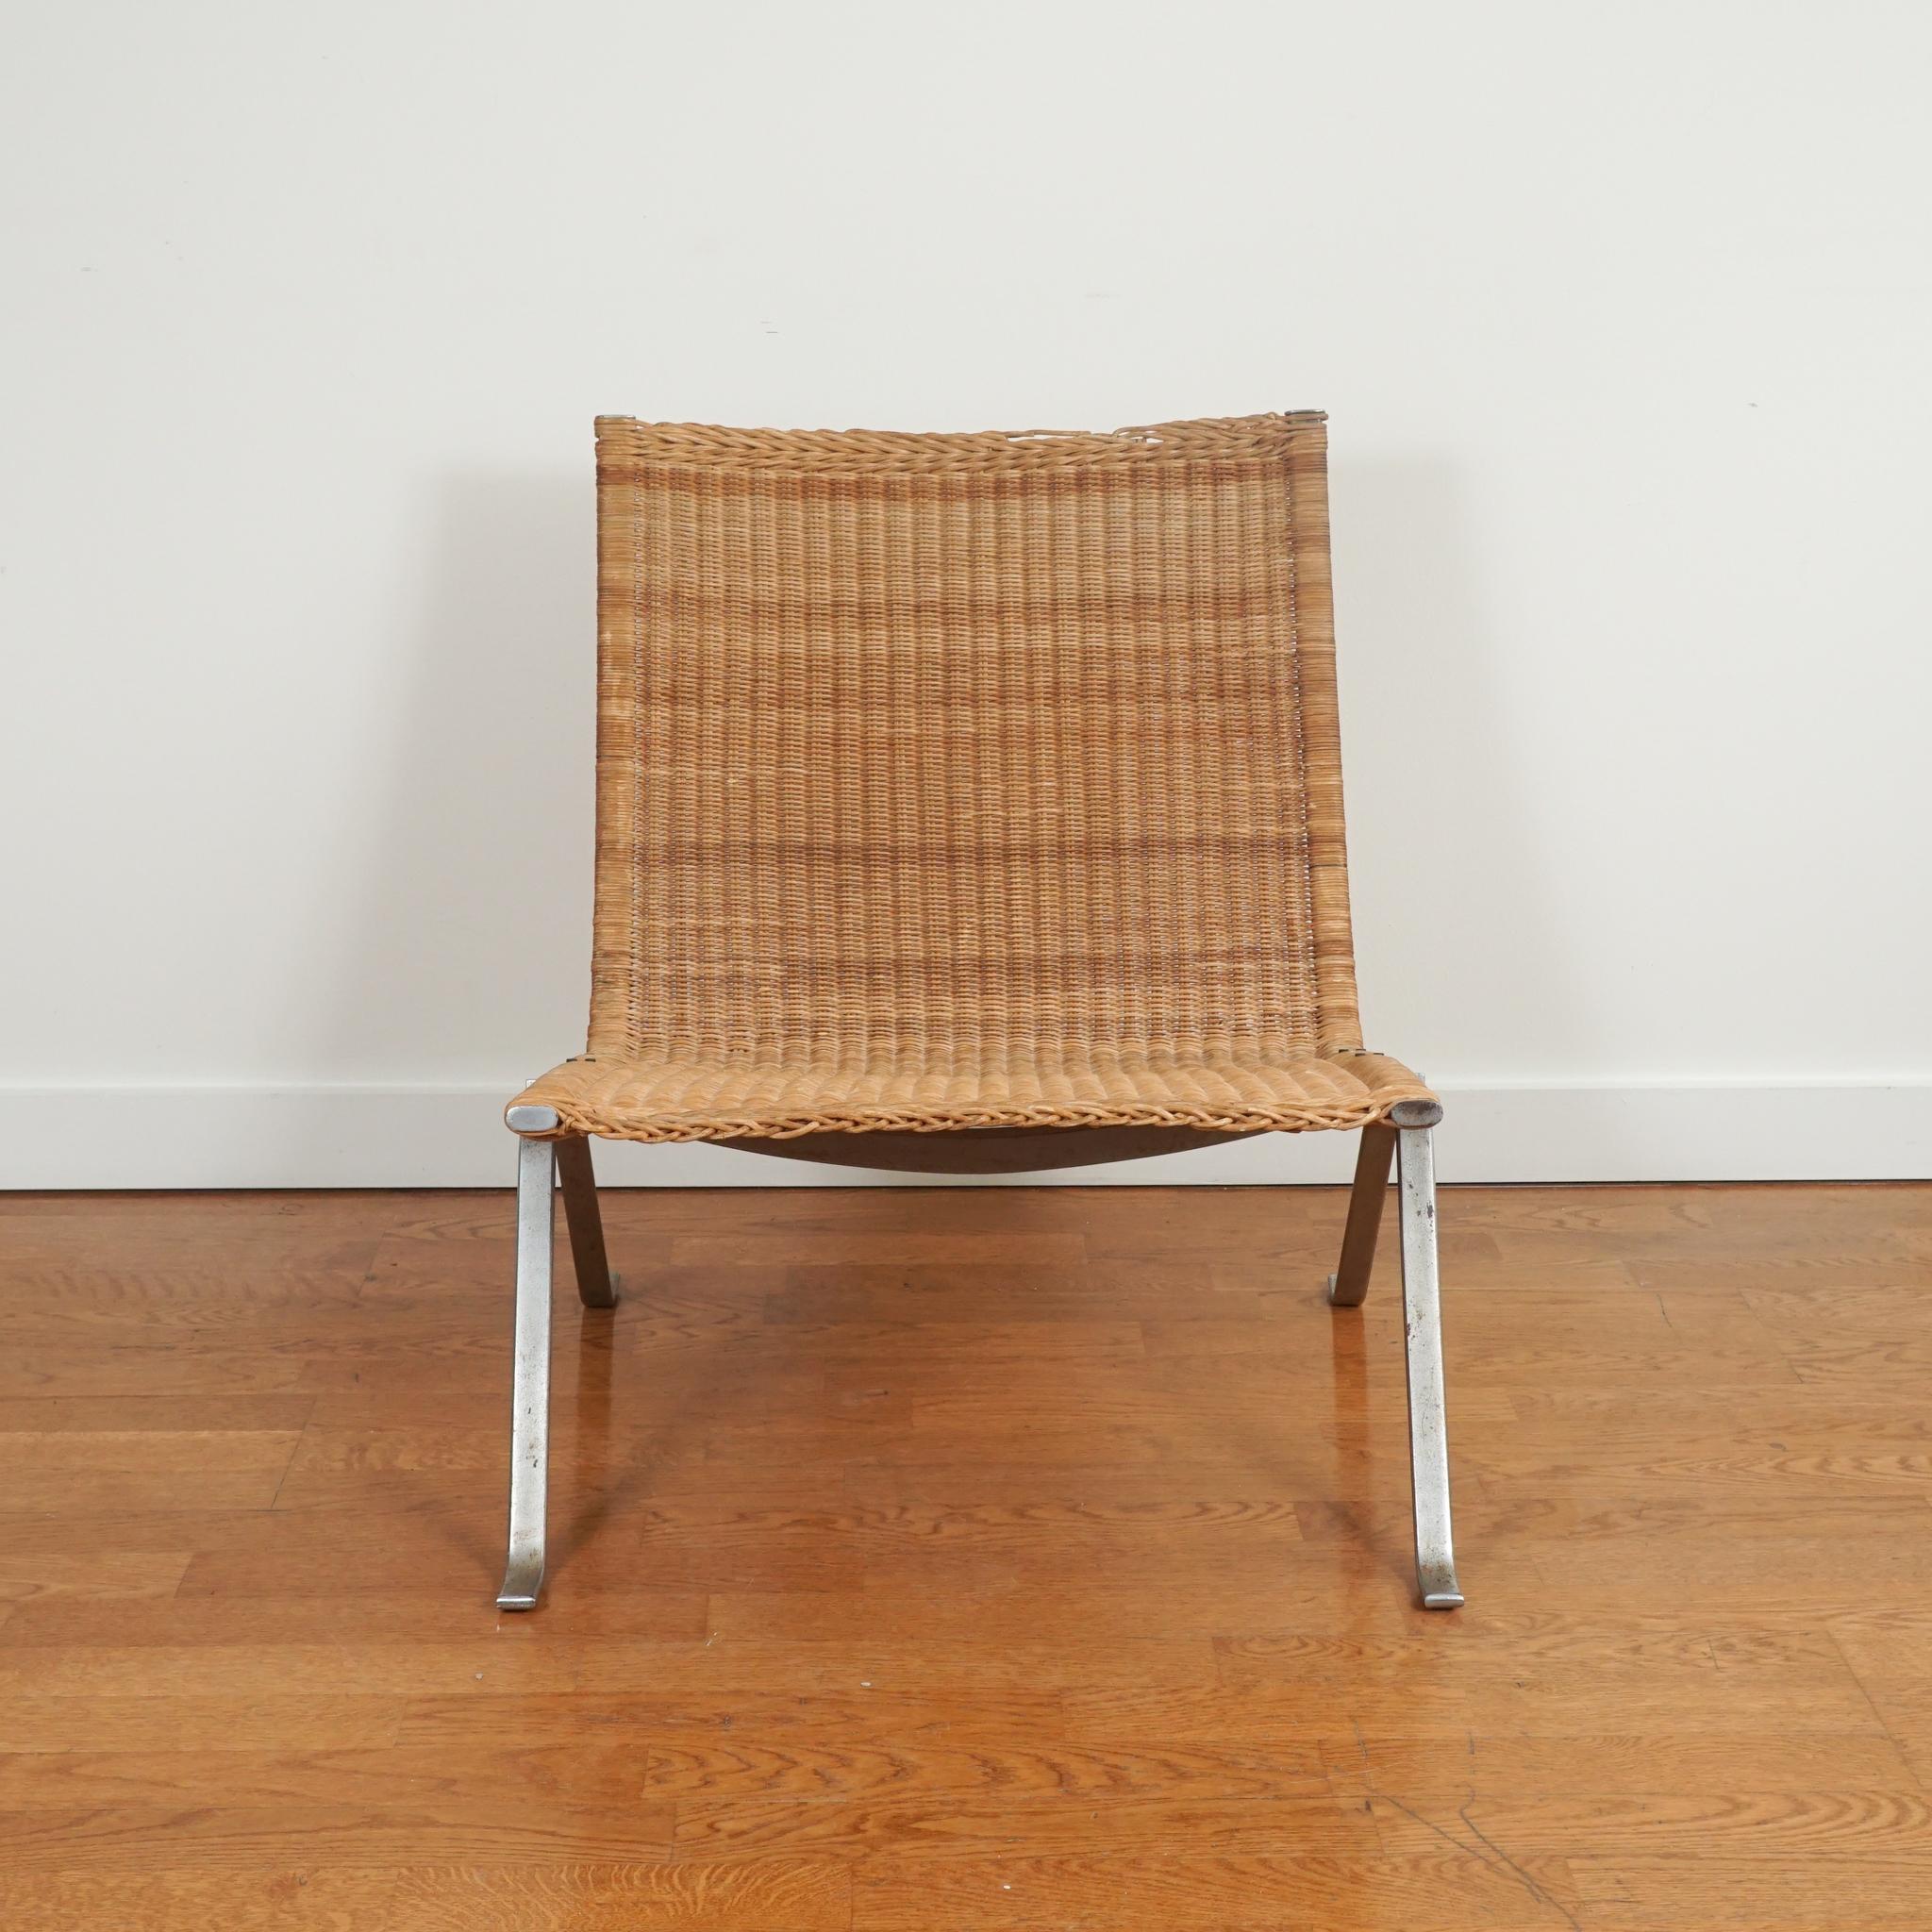 Highly recognizable and extremely desirable is this Poul Kjaerholm PK 22 wicker and stainless lounge chair—one of two available. Made with wicker and brushed steel, the chair by Poul Kjaerholm for E. Kold Christensen was designed 1951. Two chairs